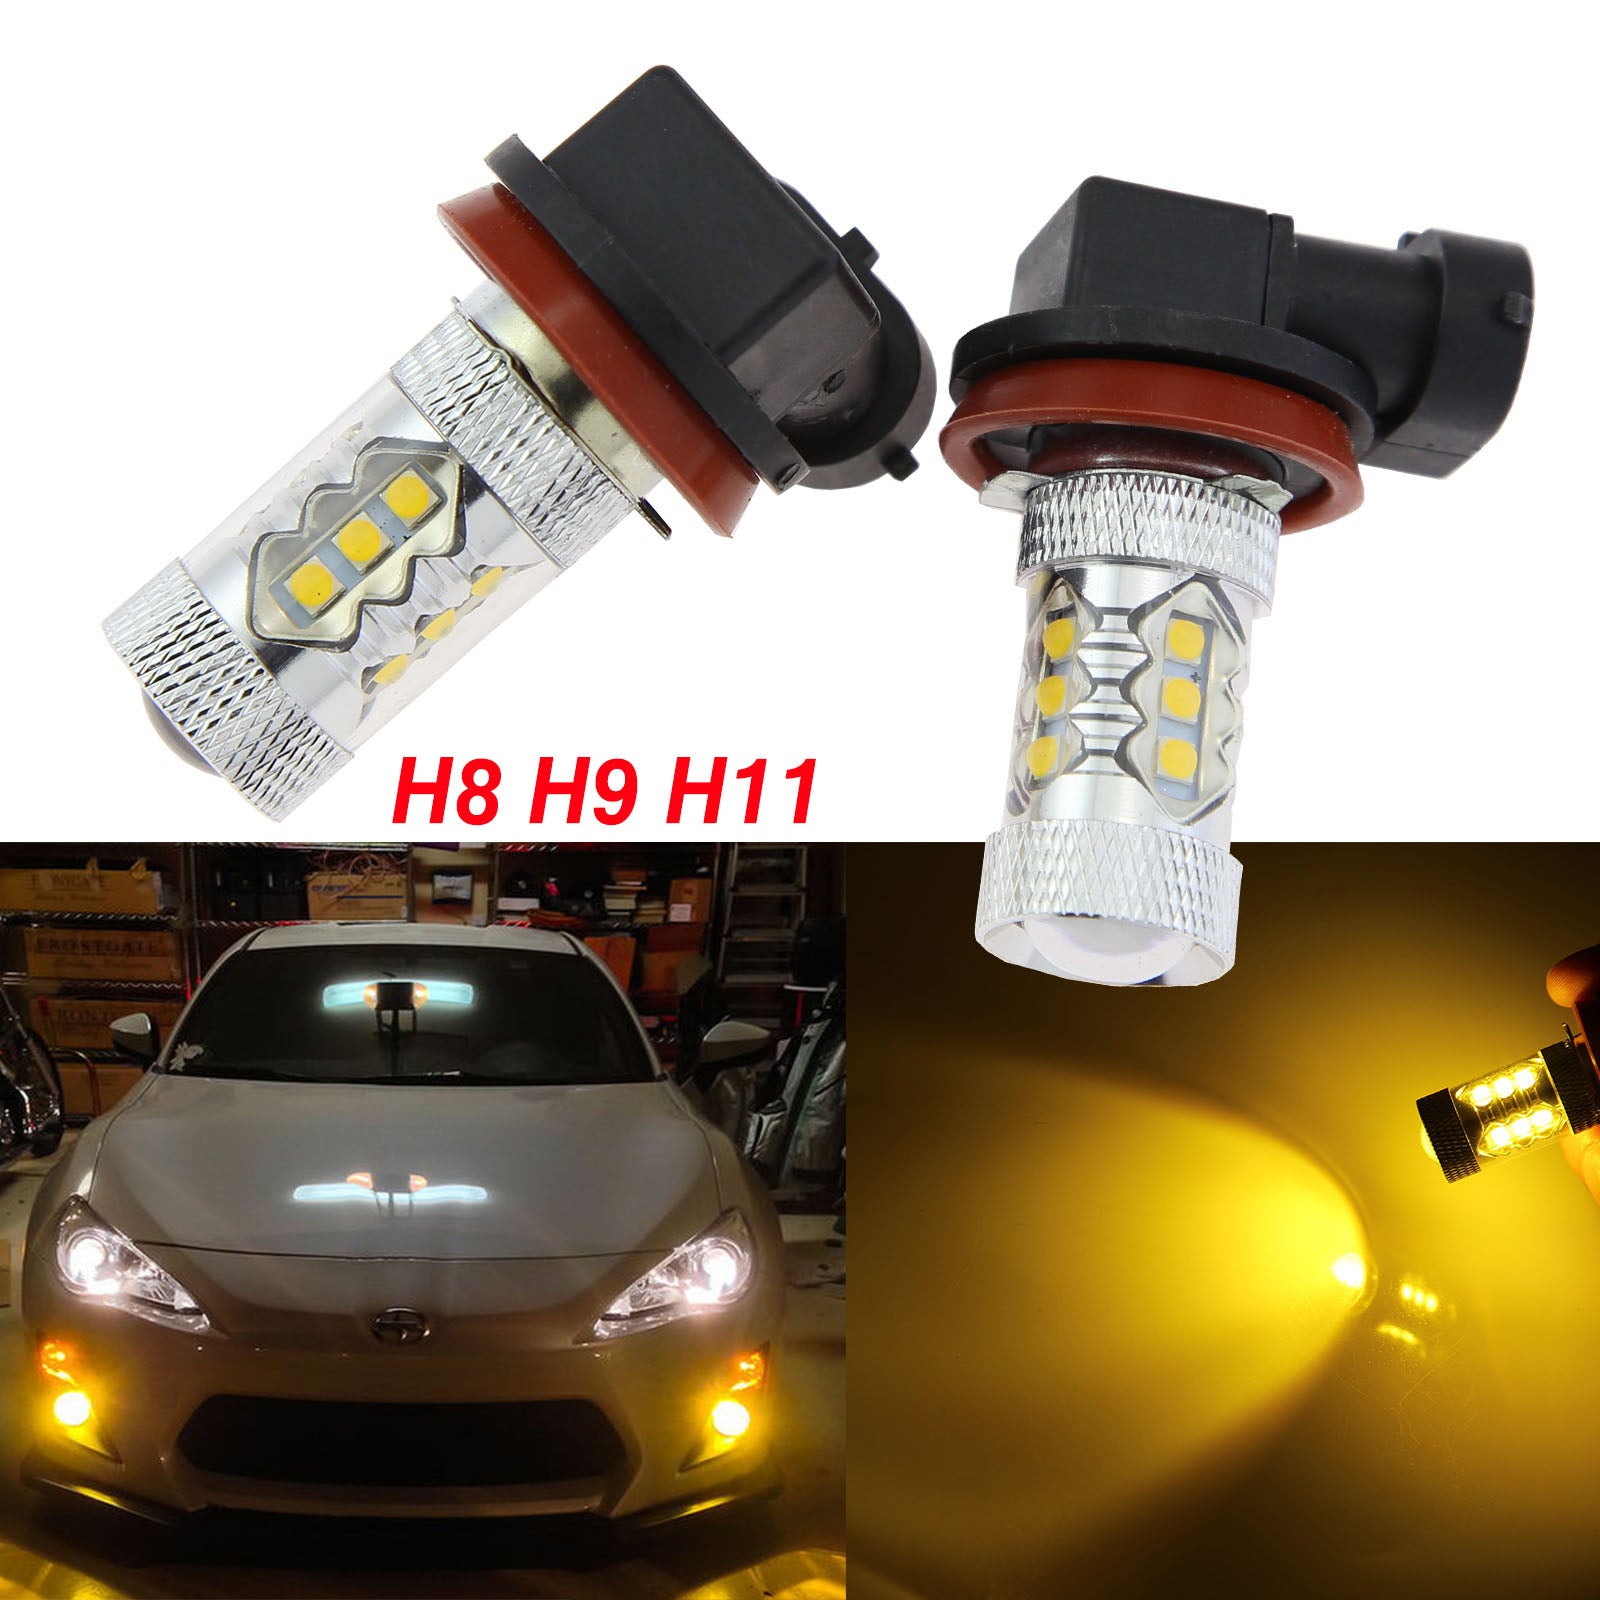 H8 H9 H11 High Power Gold Yellow CREE LED DRL Fog Lights Bulbs For